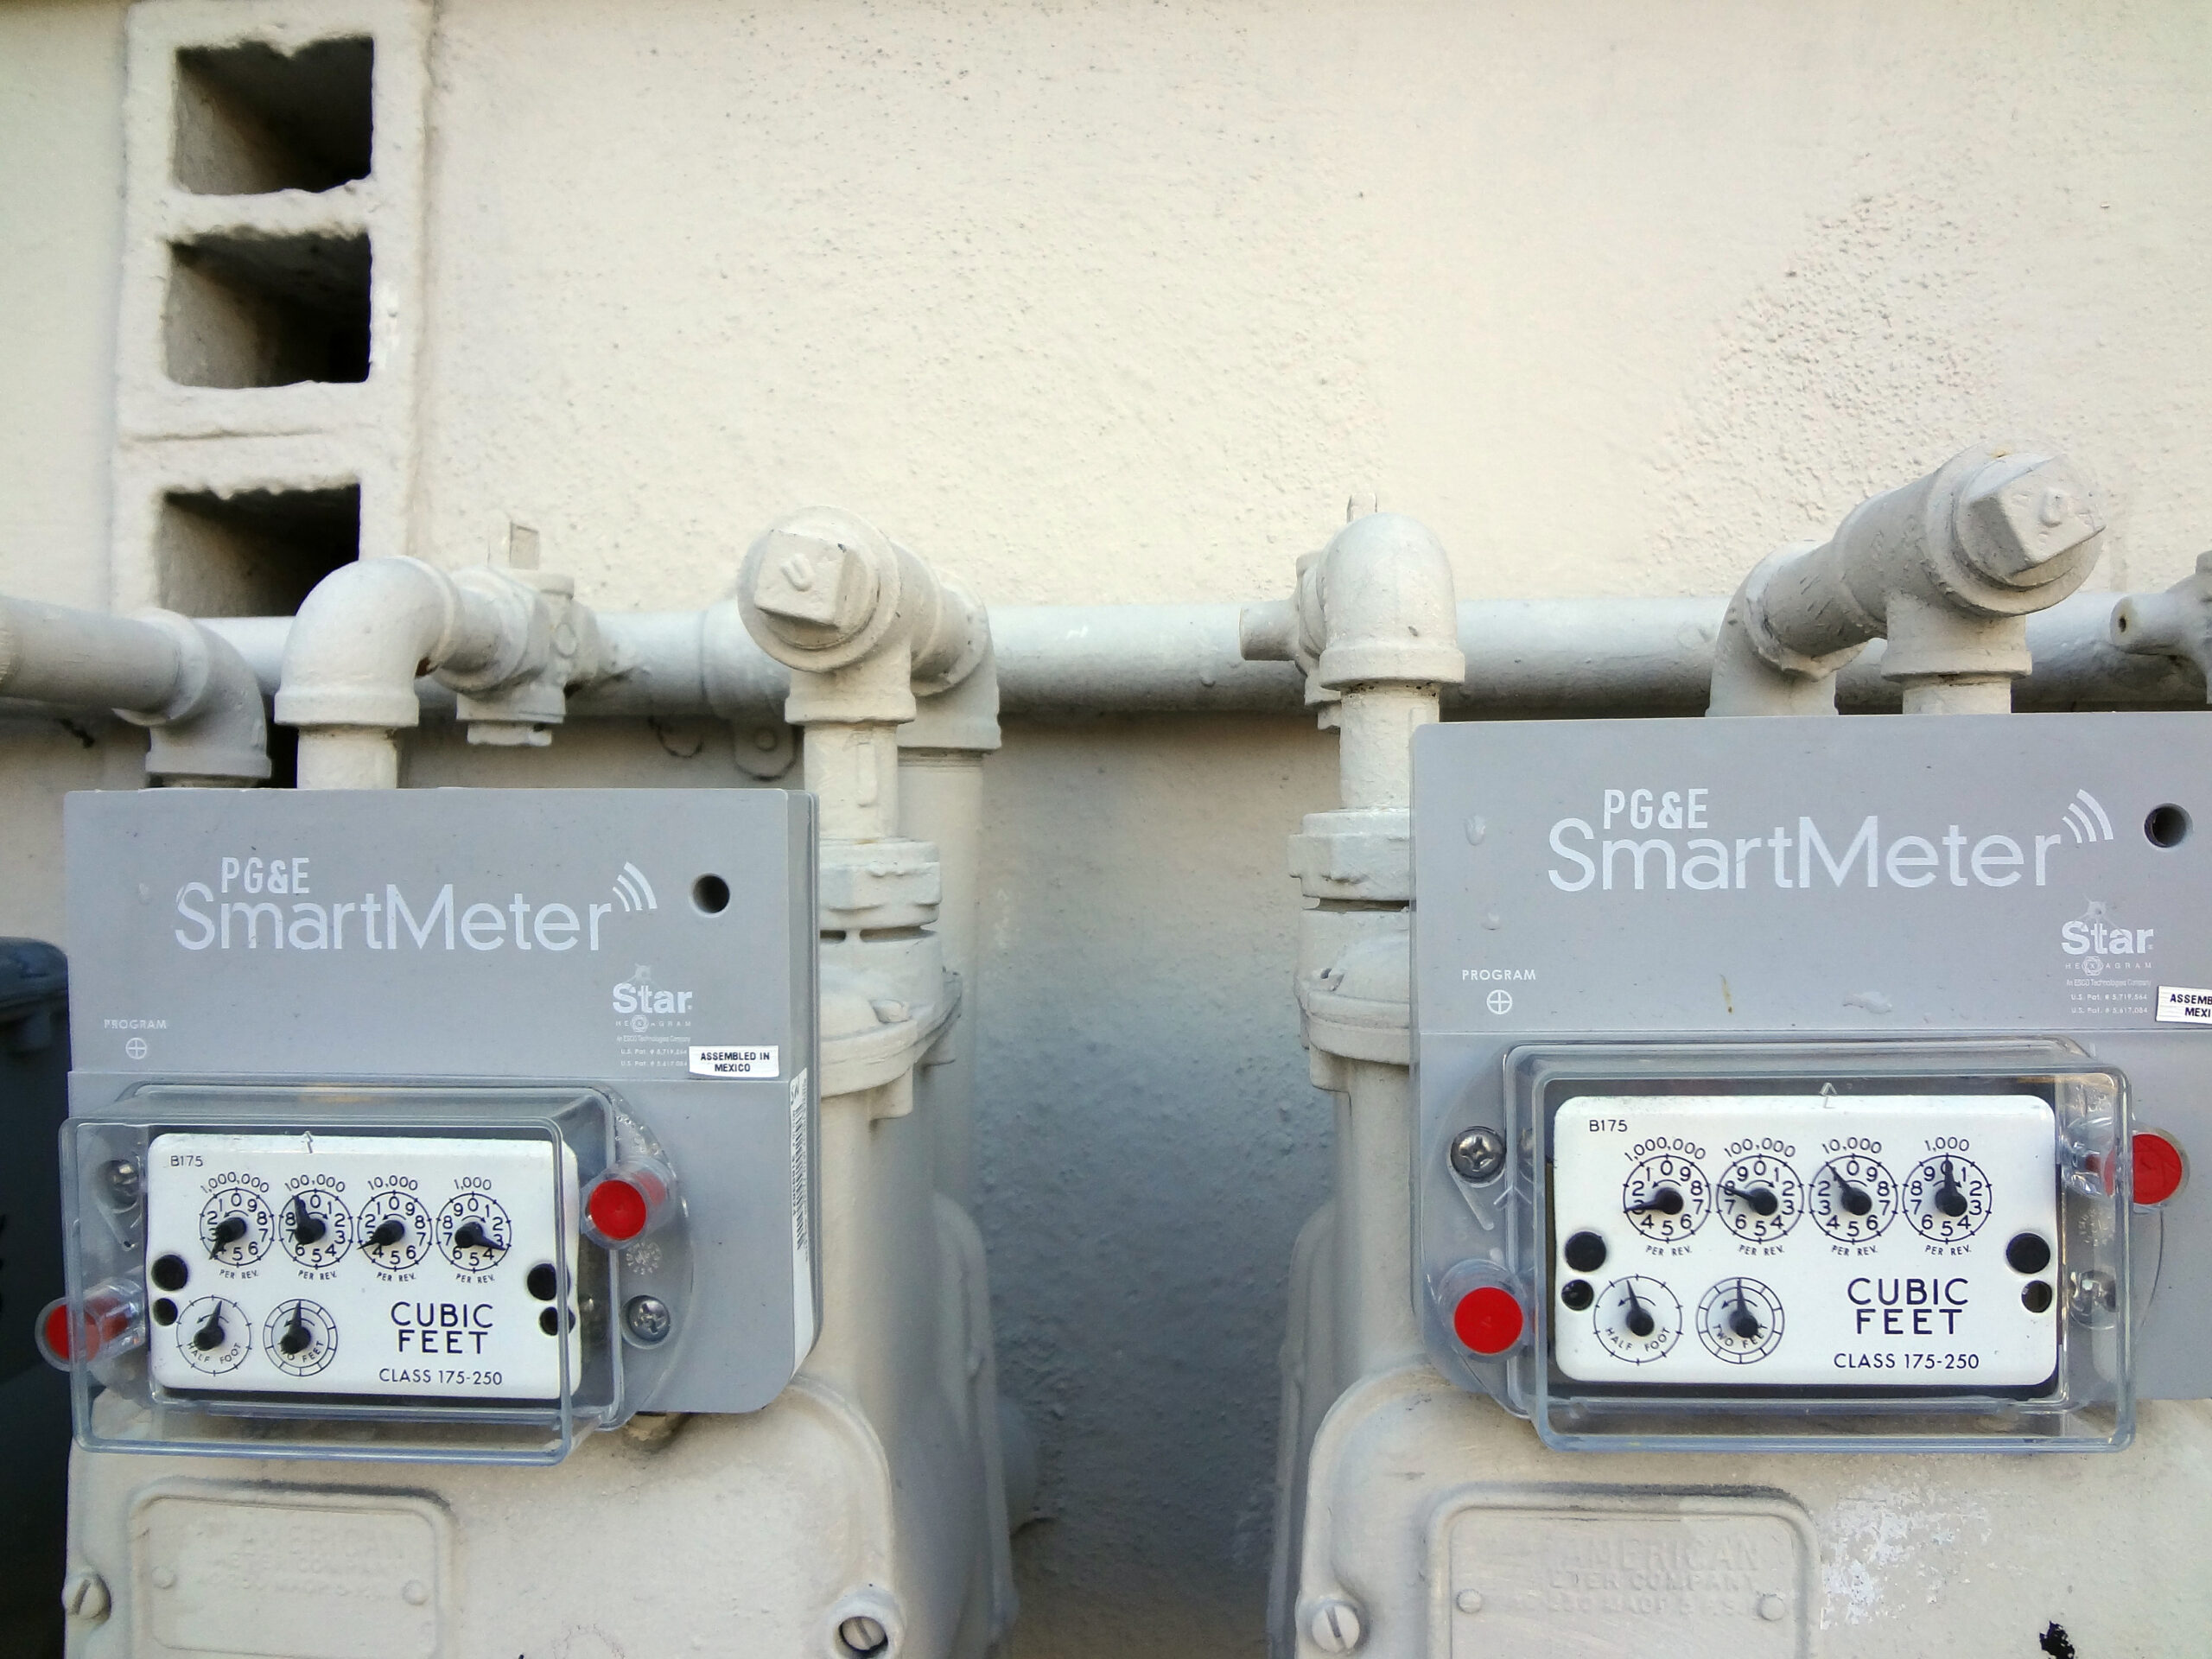 Two PG&E SmartMeters are attached to a wall with pipes above and below them.